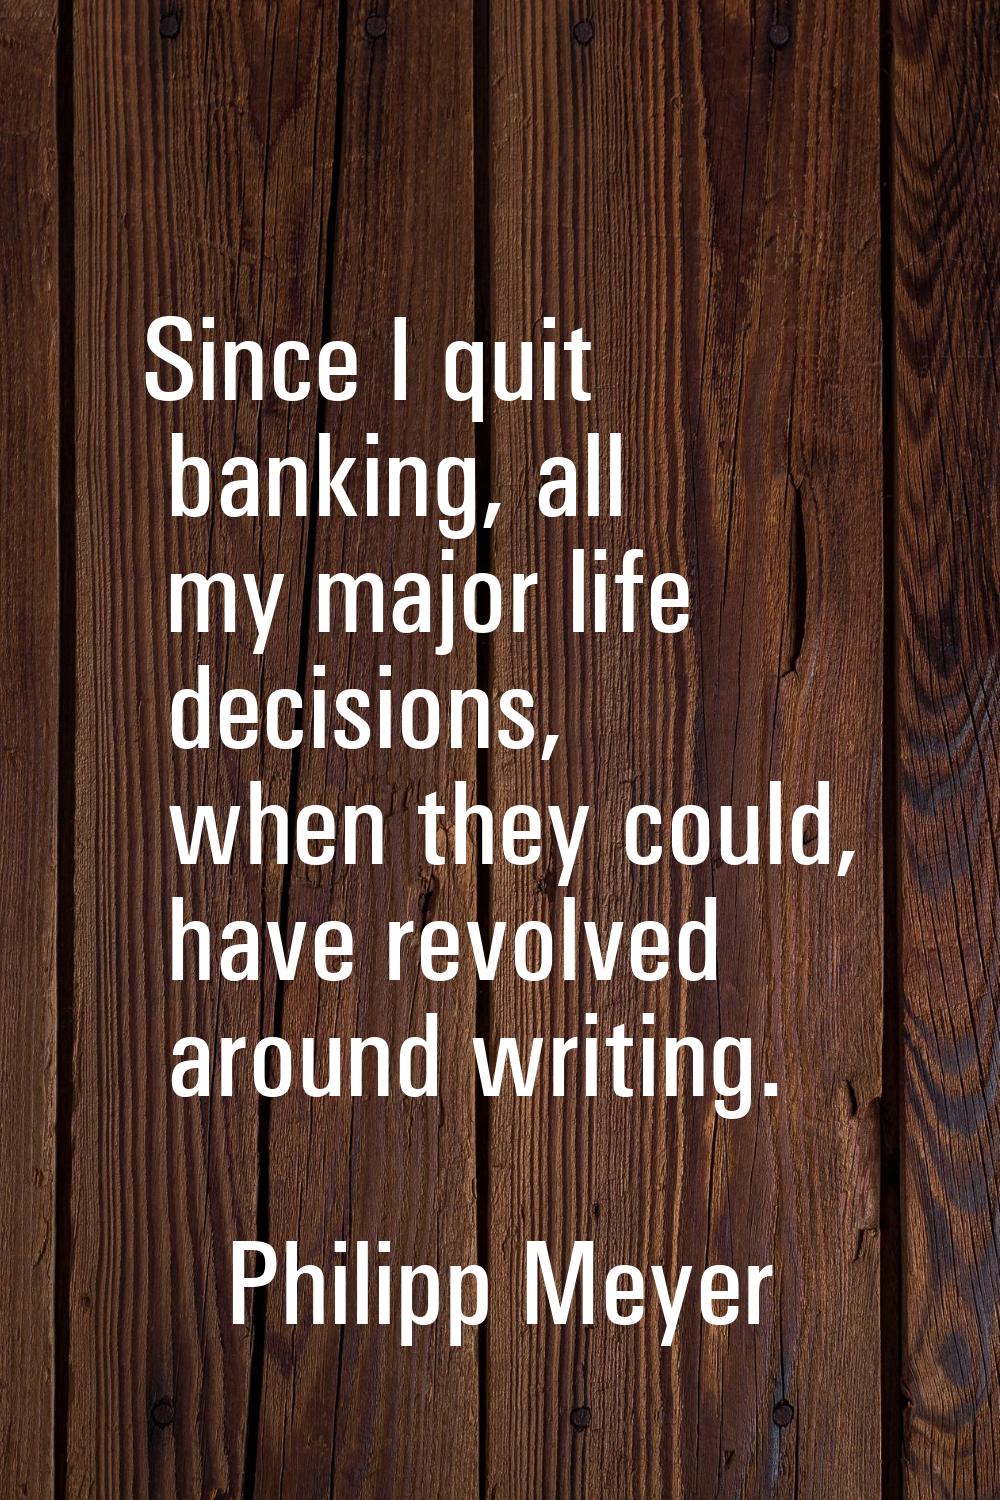 Since I quit banking, all my major life decisions, when they could, have revolved around writing.